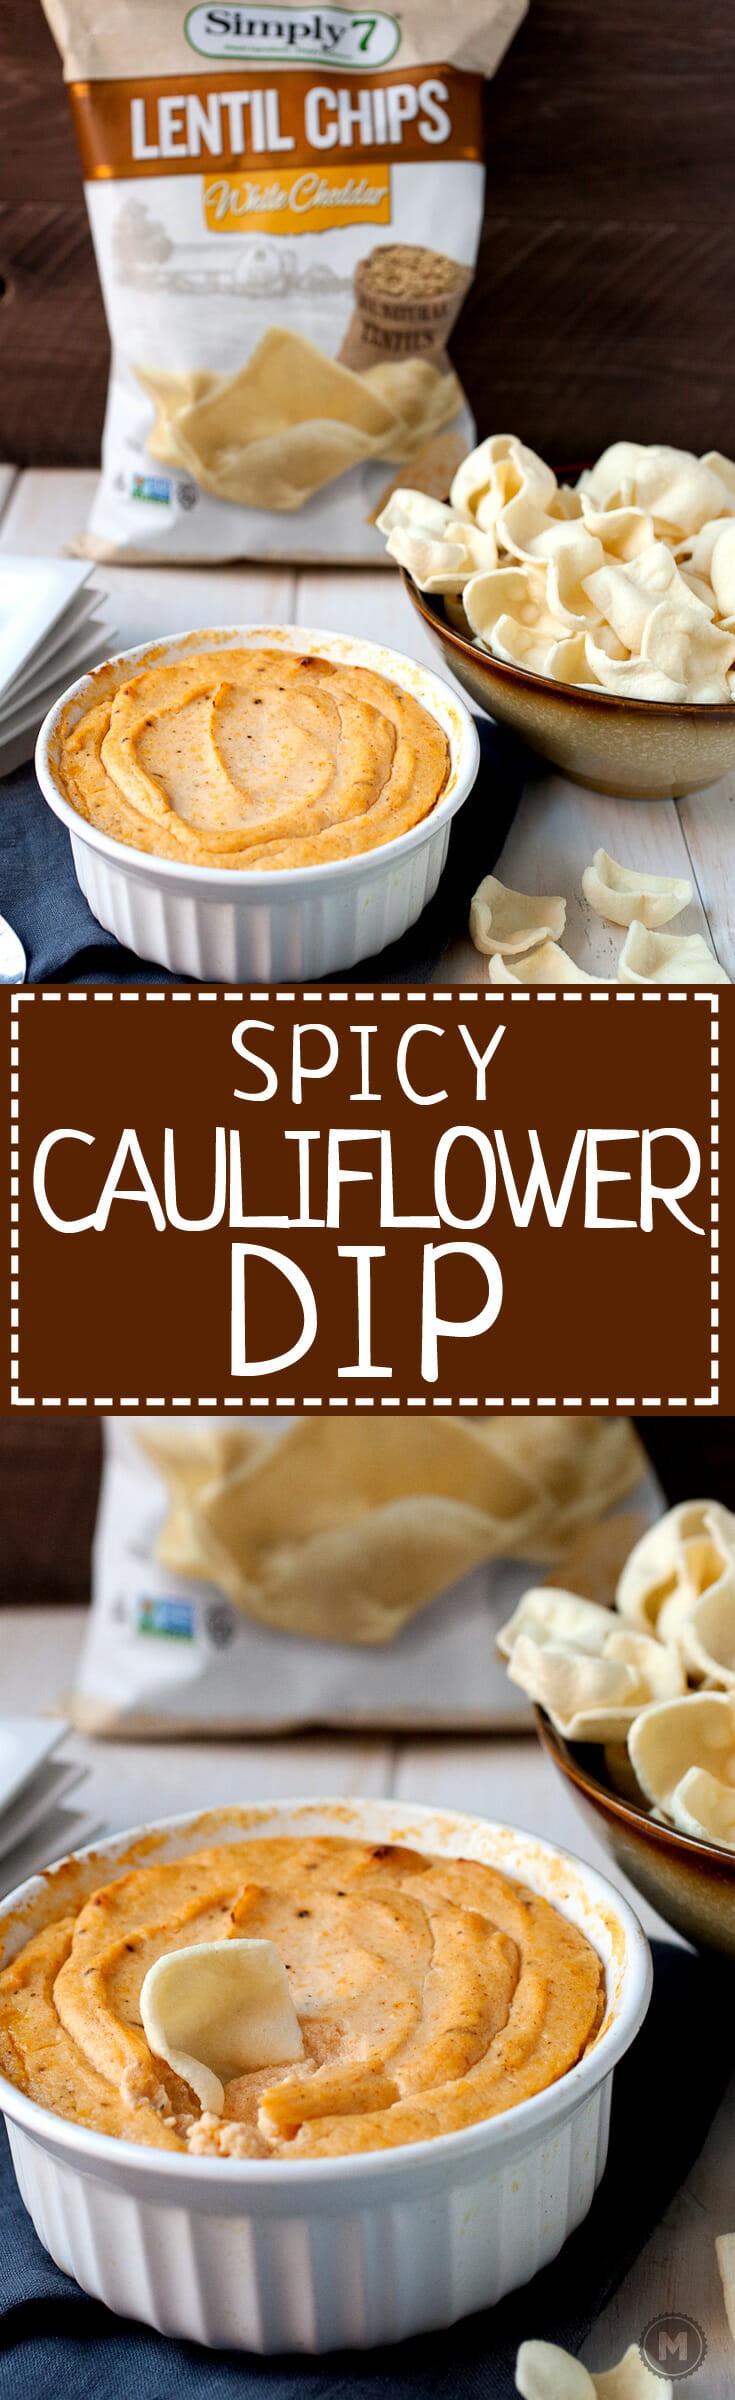 Spicy Cauliflower Dip: This healthy dip is a great substitution for a classic baked cheese dip. It has just enough sharp cheddar and is loaded with pureed cauliflower and delicious spices. I like to serve mine with Simply7 Lentil chips! #sponsored | macheesmo.com